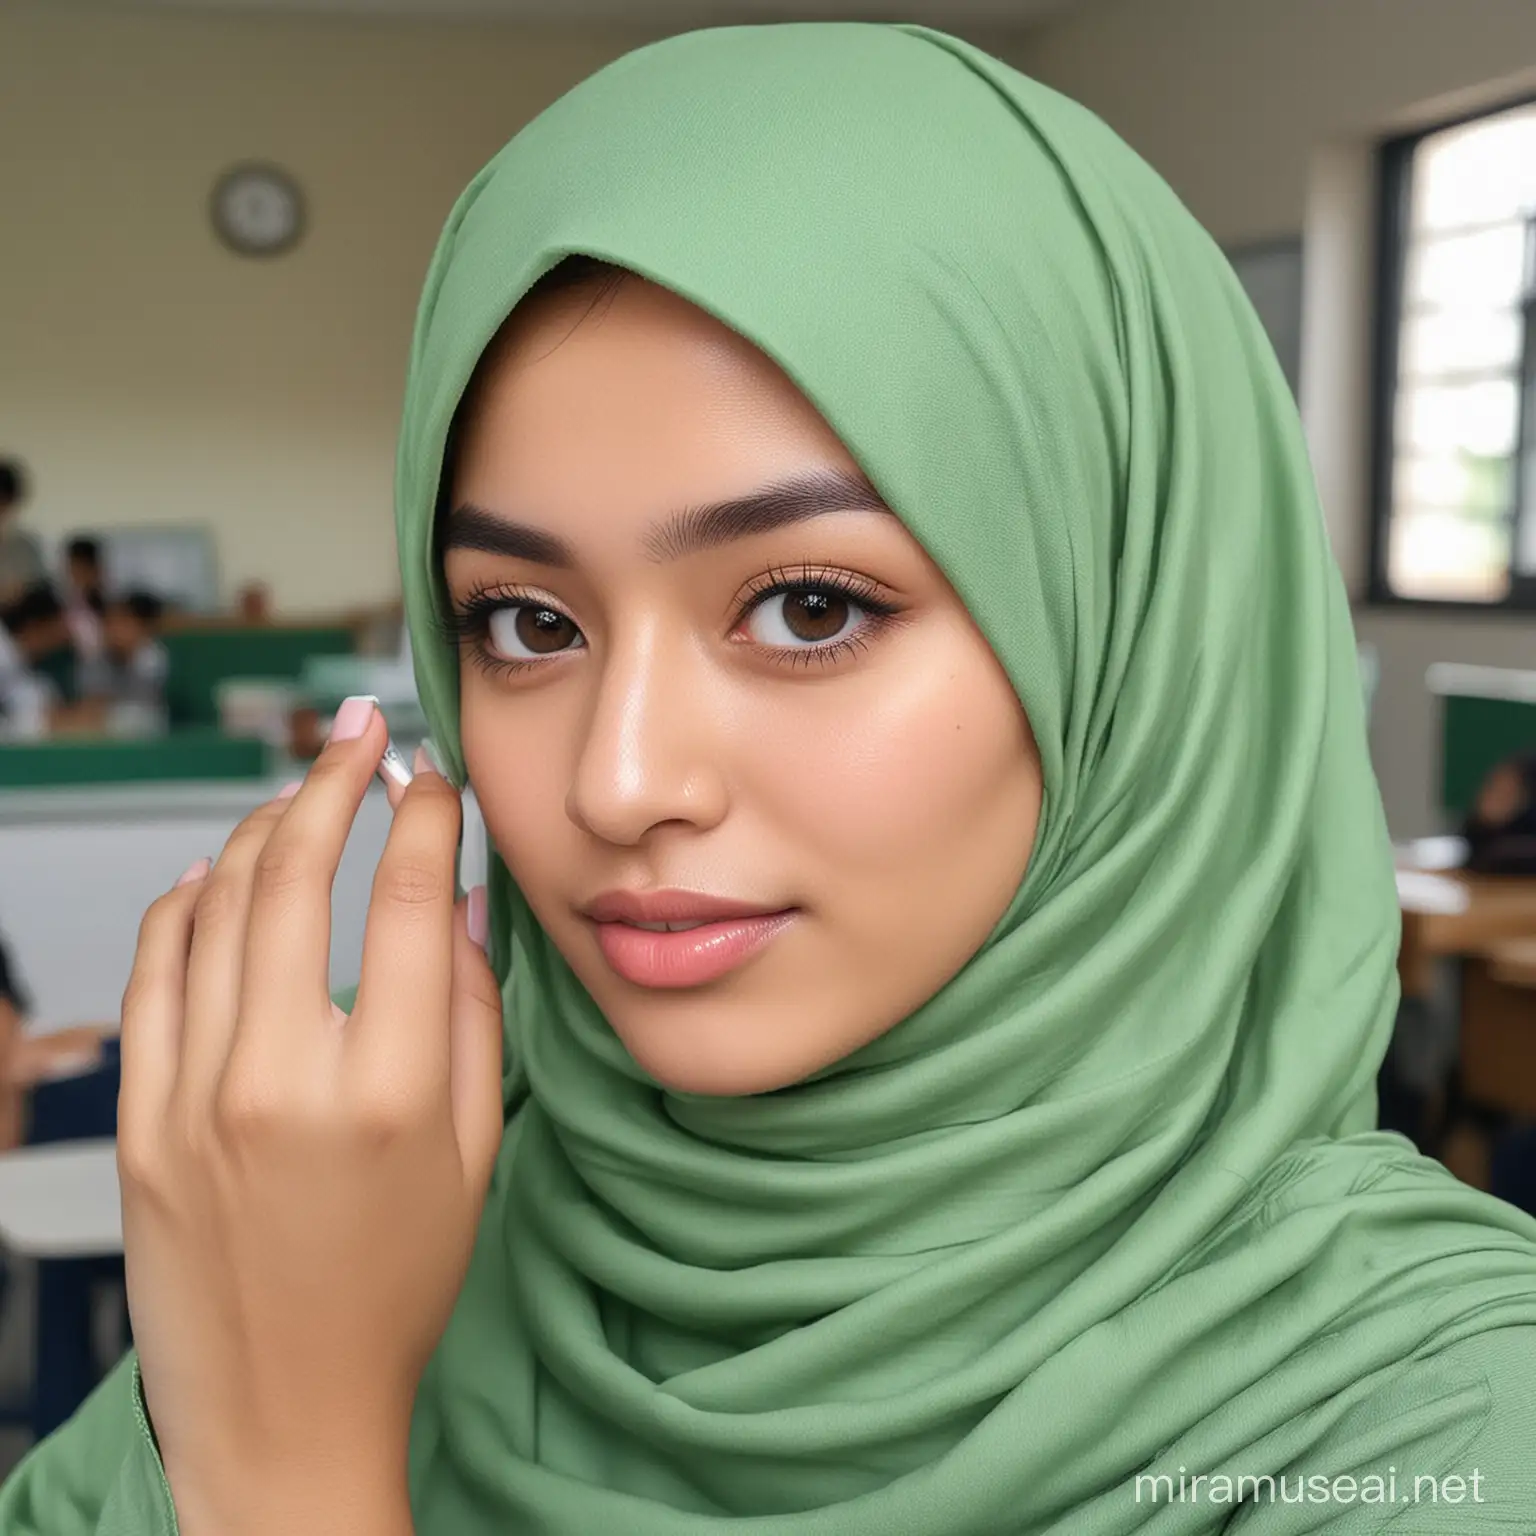 The girl wearing a hijab with an Indonesian face is at school  using softlense green color